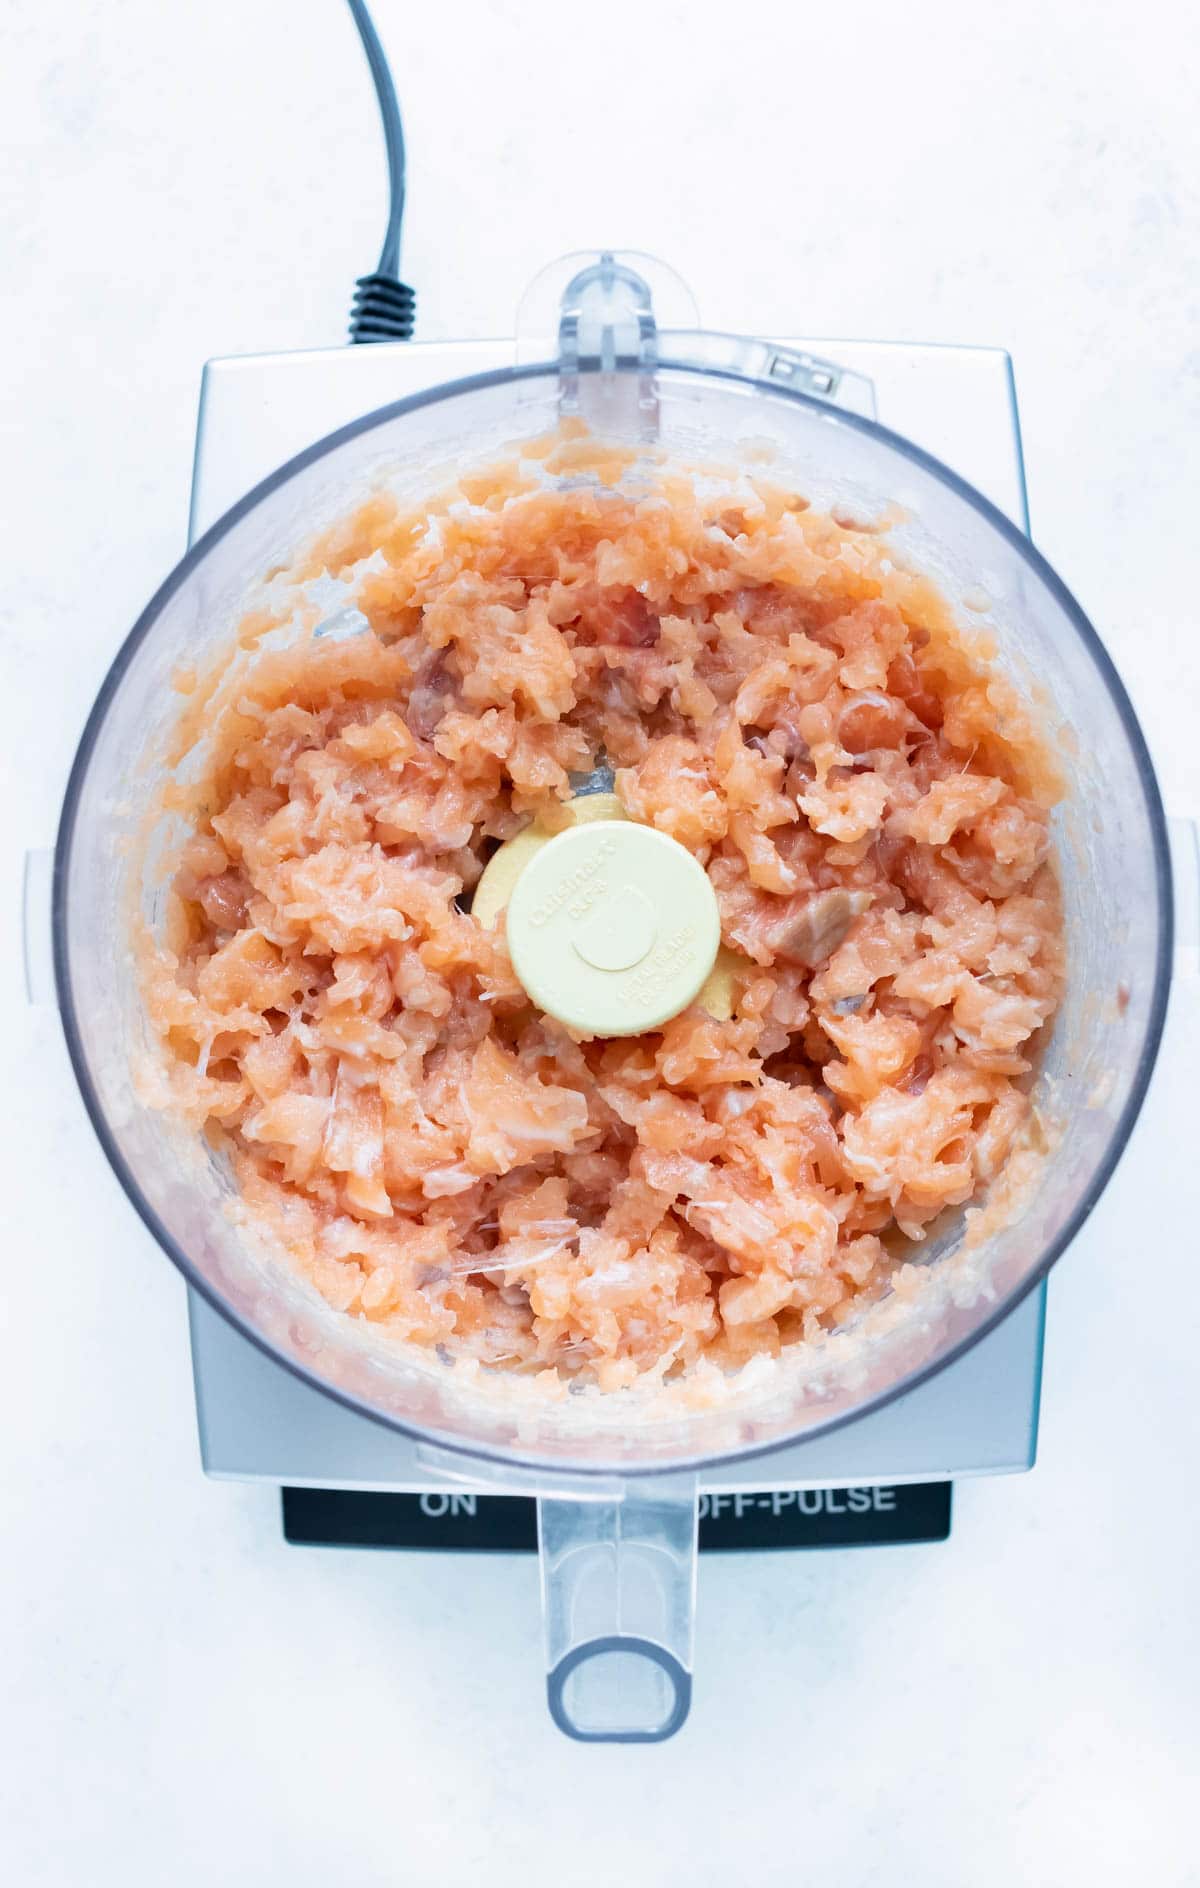 Salmon is finely chopped in a food processor.